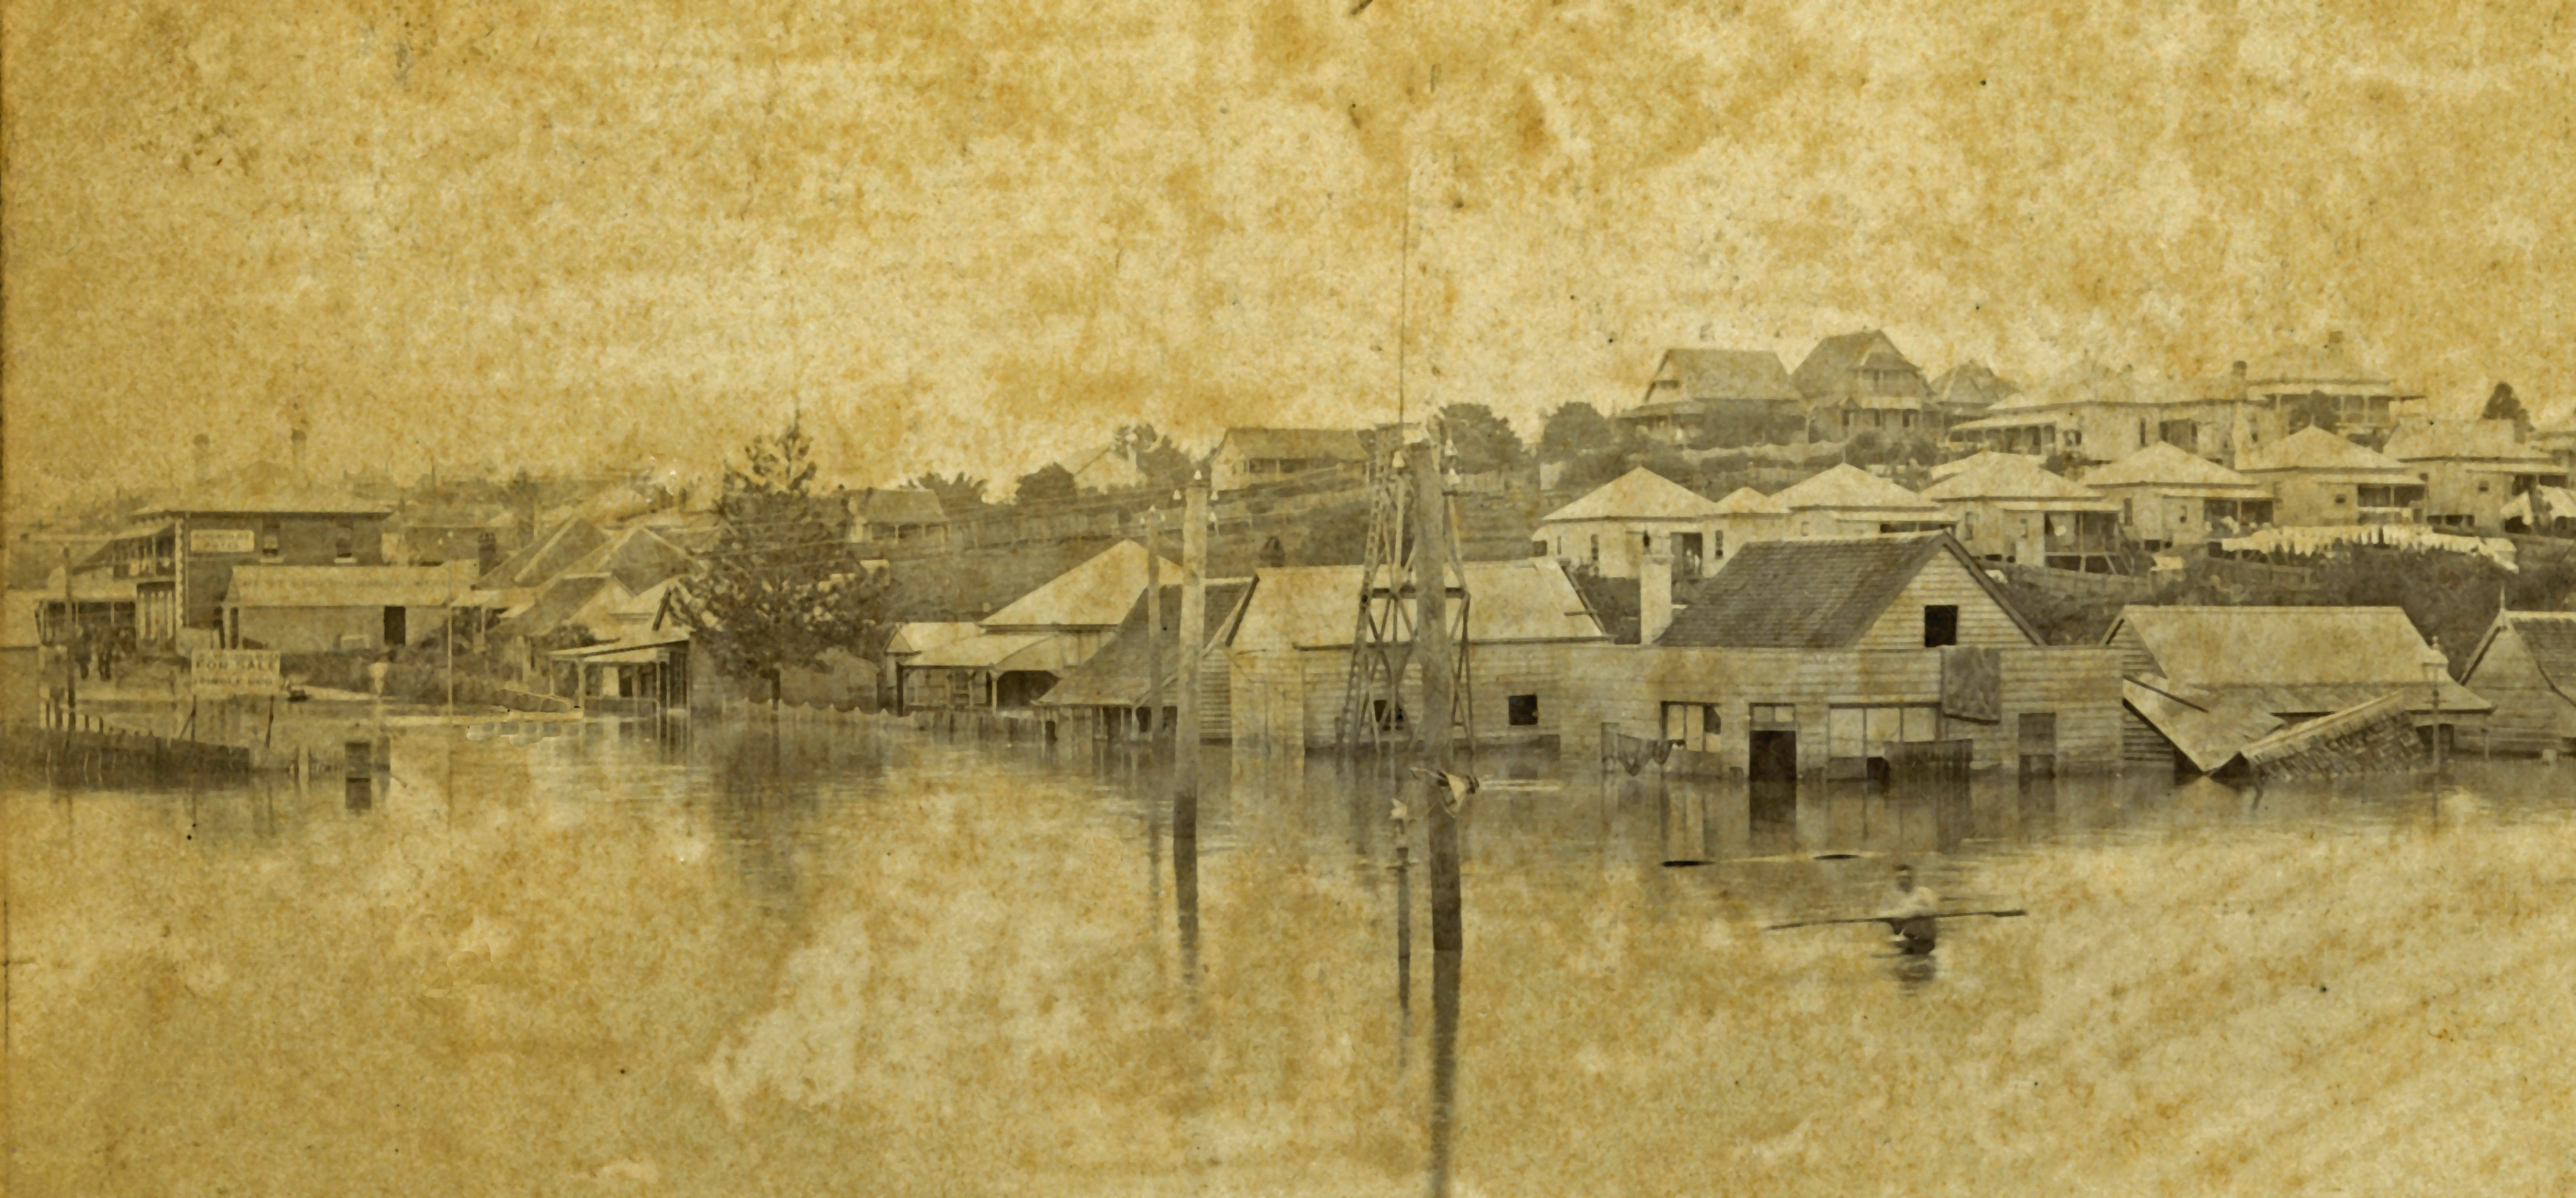 Floodwaters Melbourne and Boundary Streets 1893 slq ps